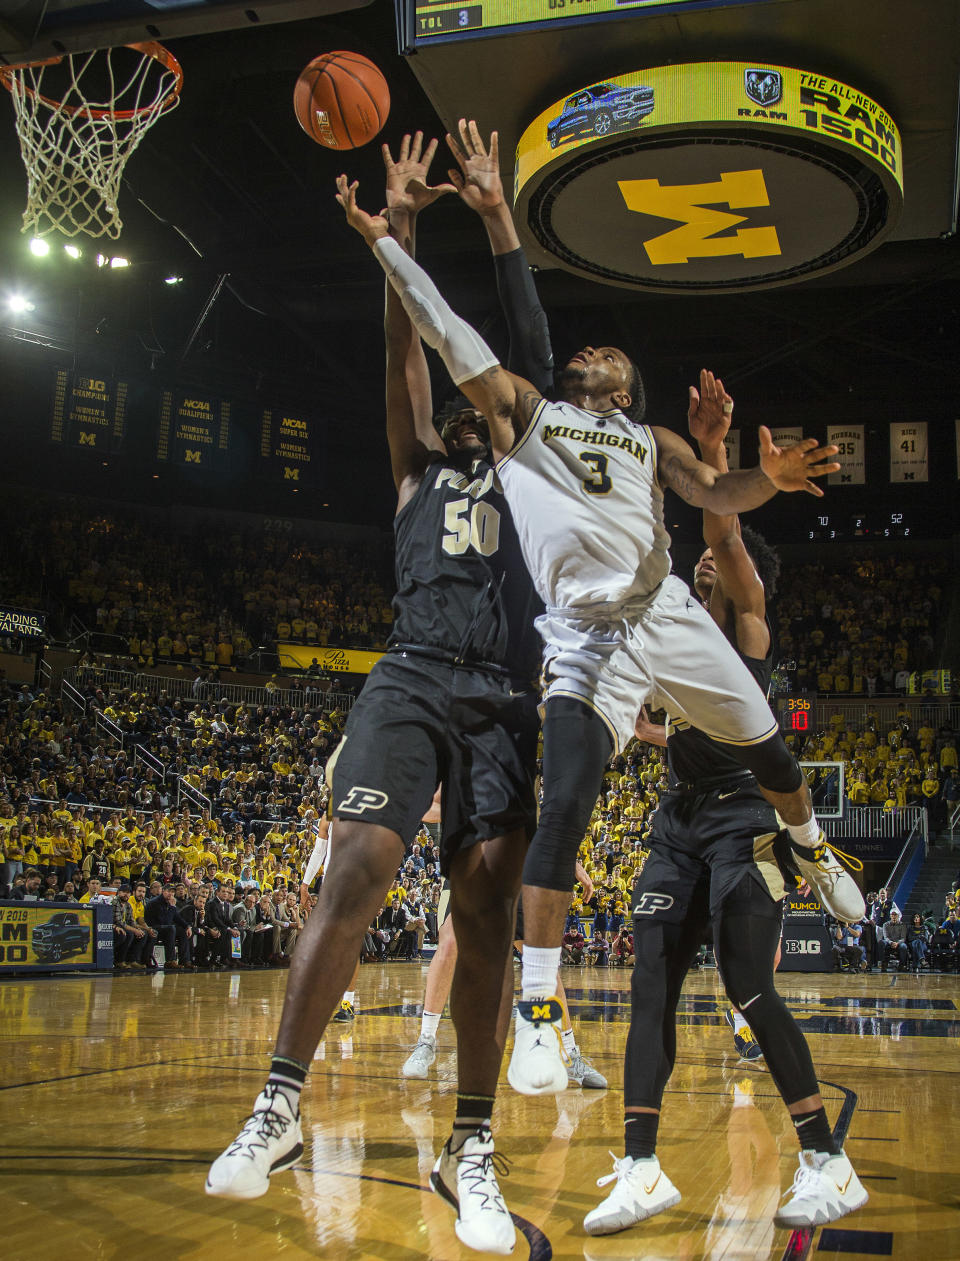 FILE - In this Dec. 1, 2018, file photo, Michigan guard Zavier Simpson (3) goes to the basket defended by Purdue forward Trevion Williams (50) in the second half of an NCAA college basketball game, in Ann Arbor, Mich. Simpson was named to the AP All-Big Ten Conference team, Tuesday, March 12, 2019. (AP Photo/Tony Ding, File)